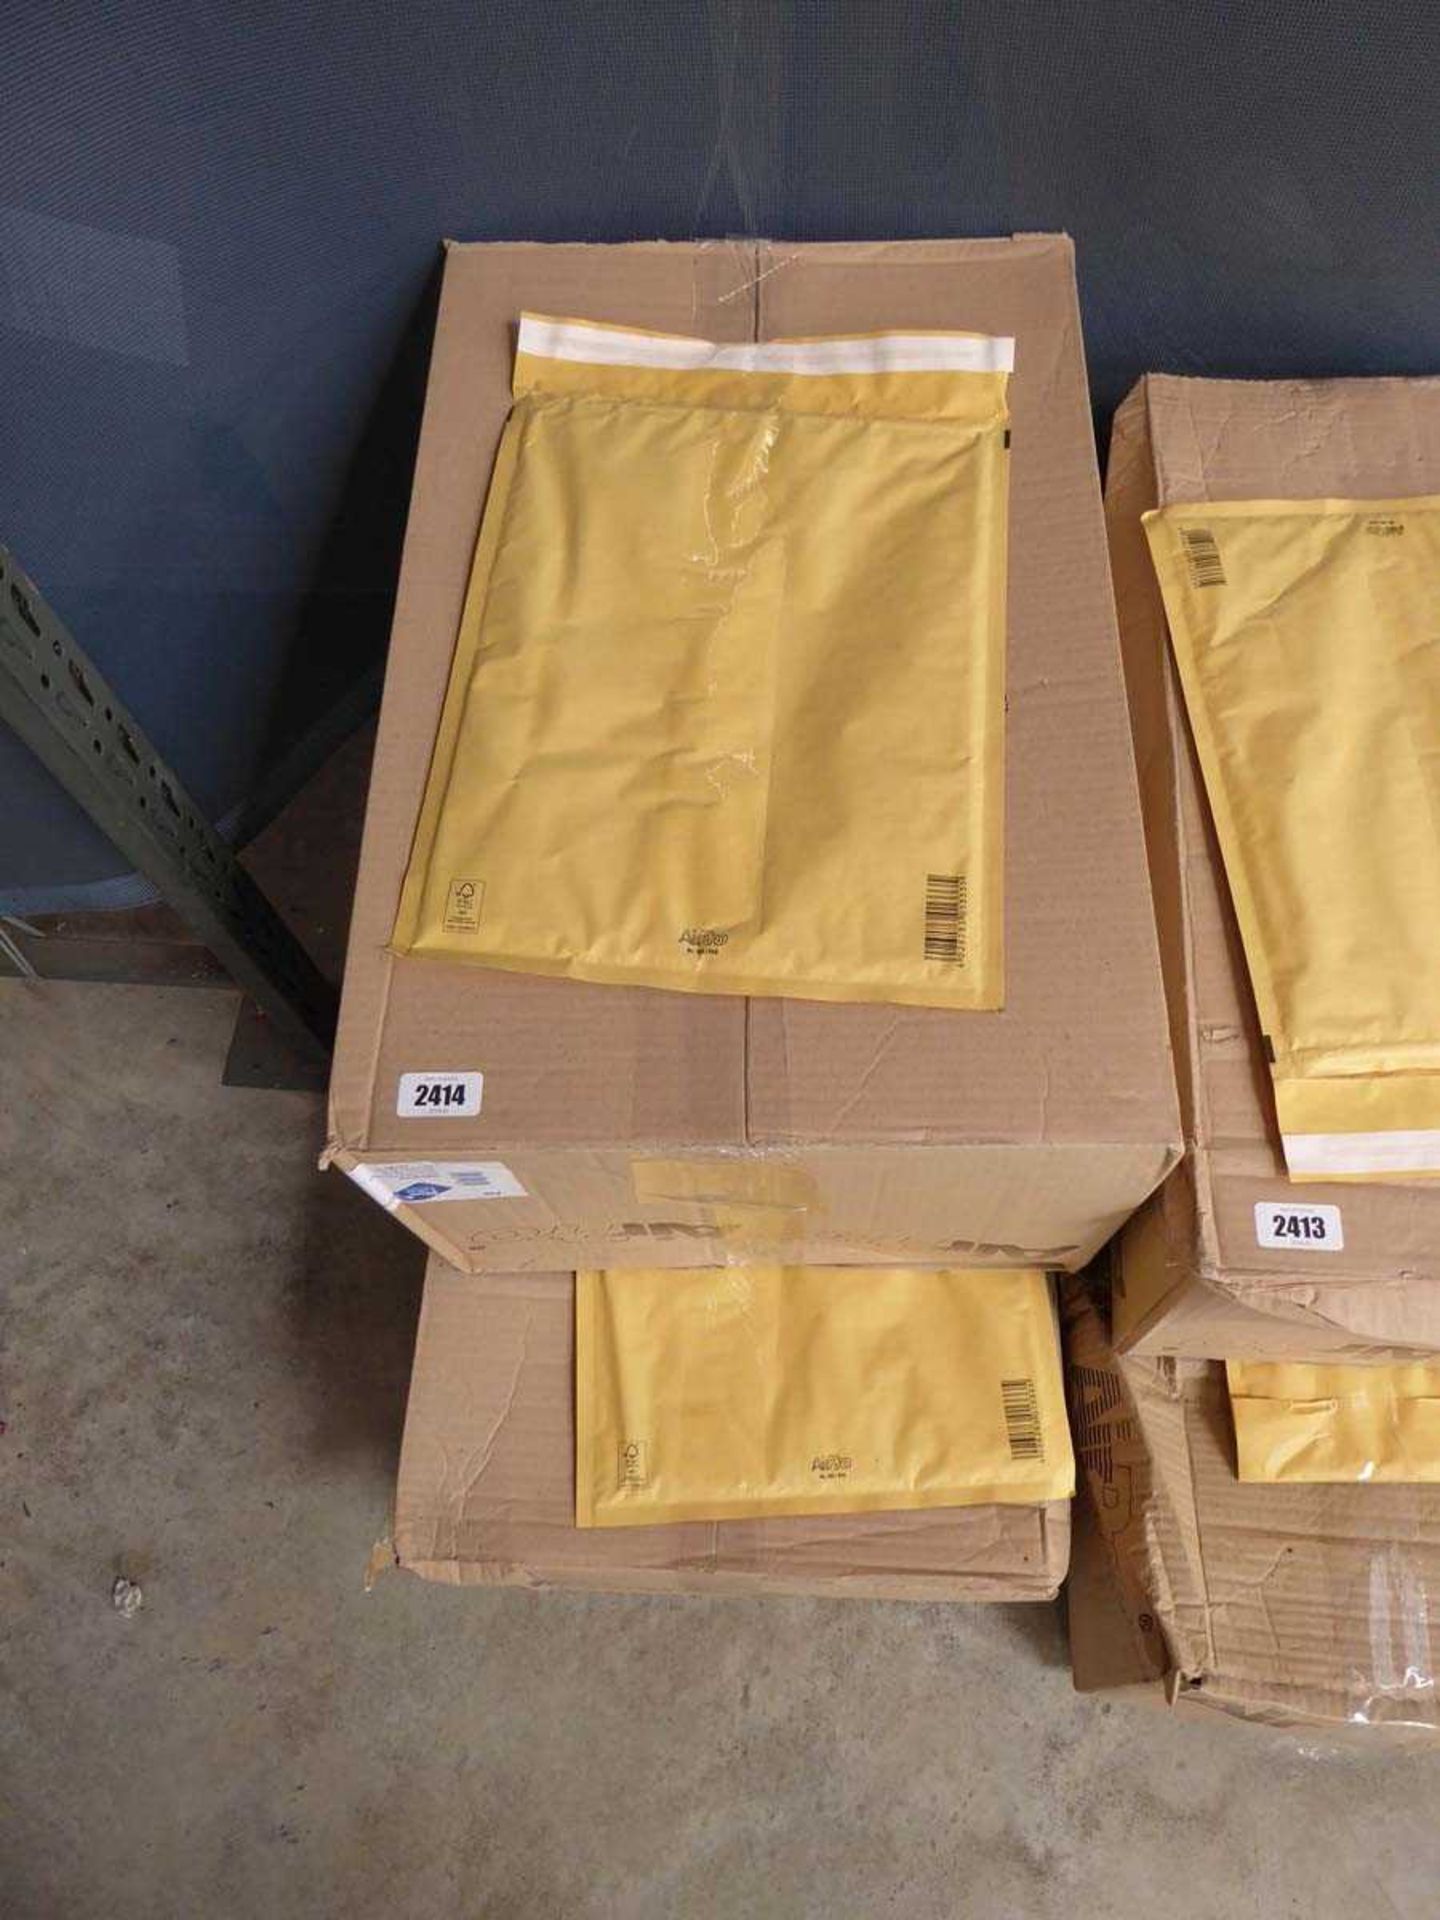 2 boxes containing approx. 100 sealed air jiffy bags